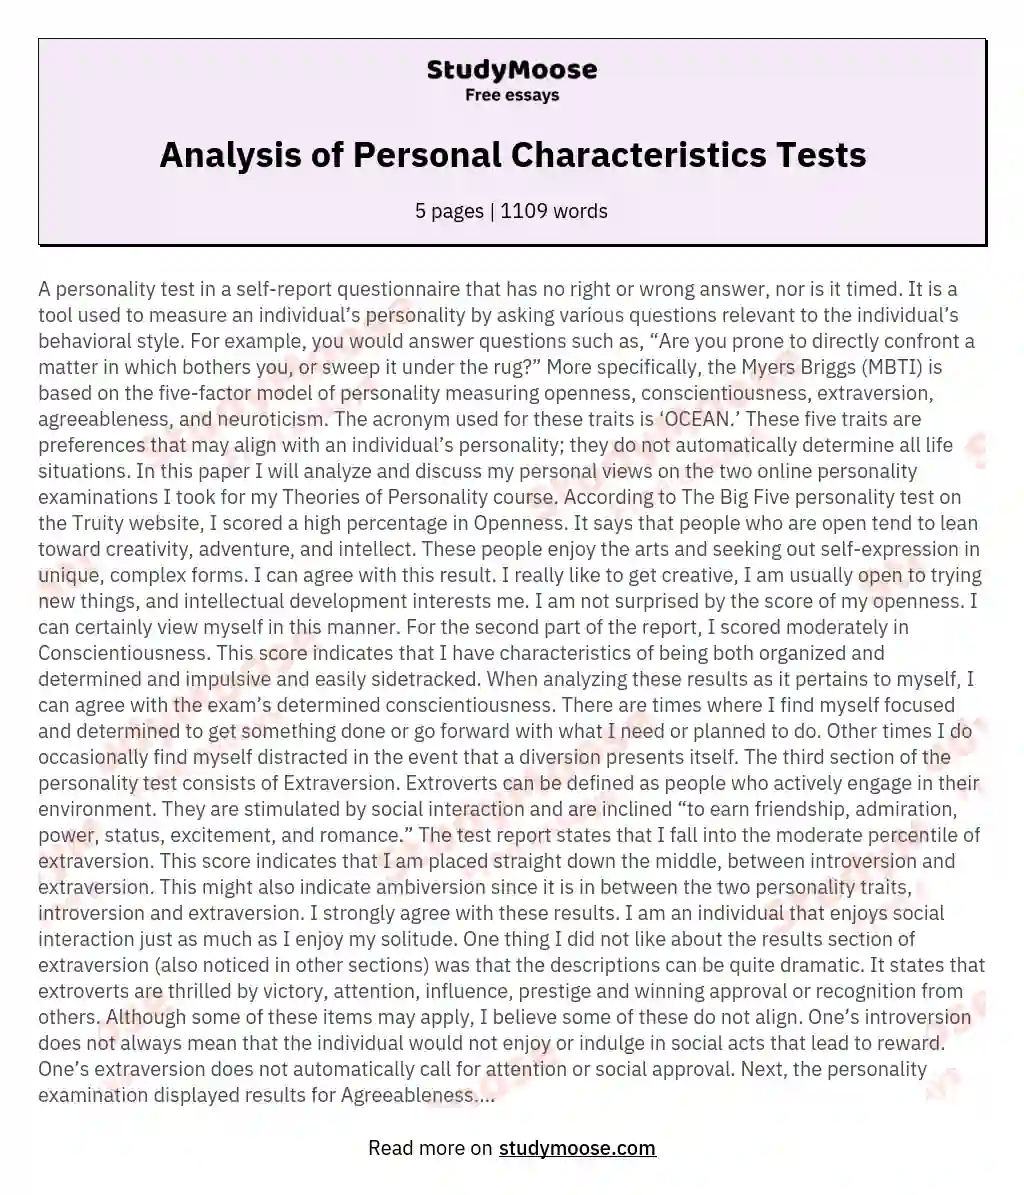 Analysis of Personal Characteristics Tests essay